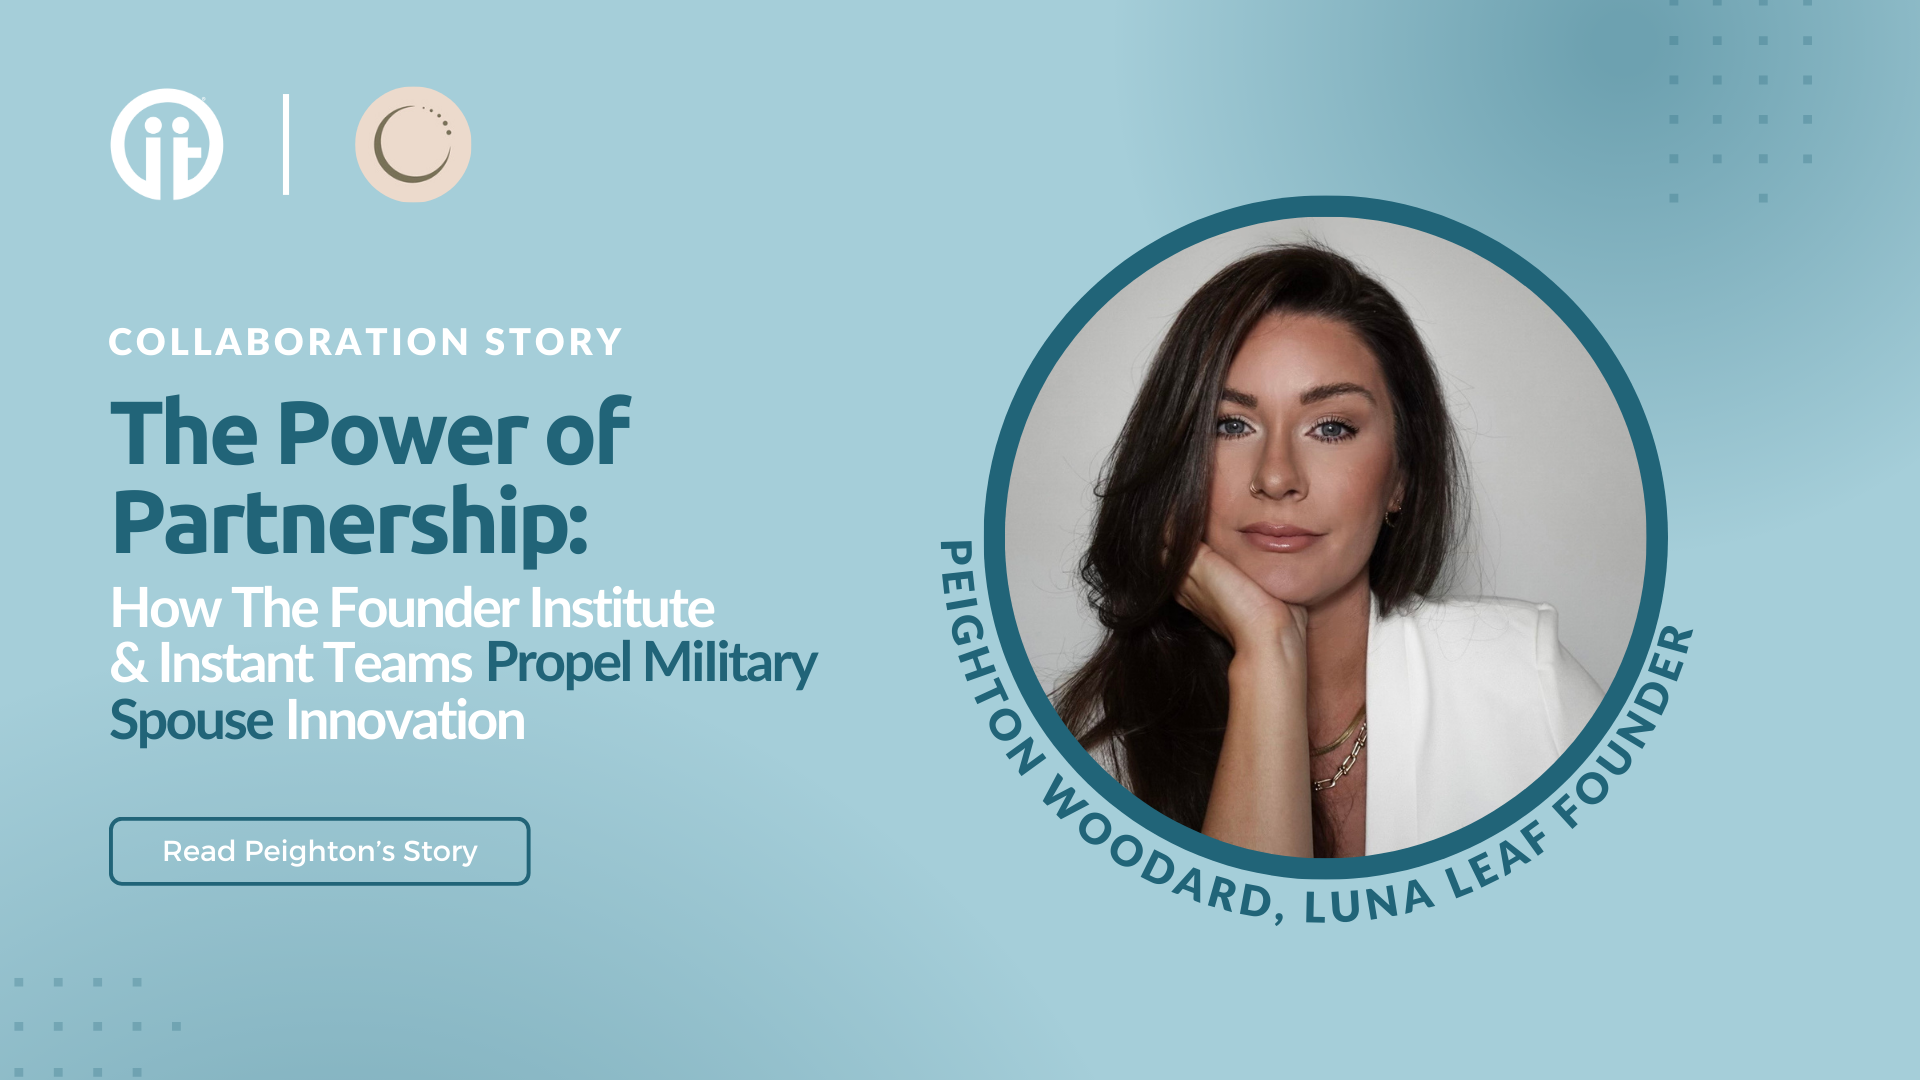 The Power of Partnership: How The Founder Institute & Instant Teams Propel Military Spouse Innovation